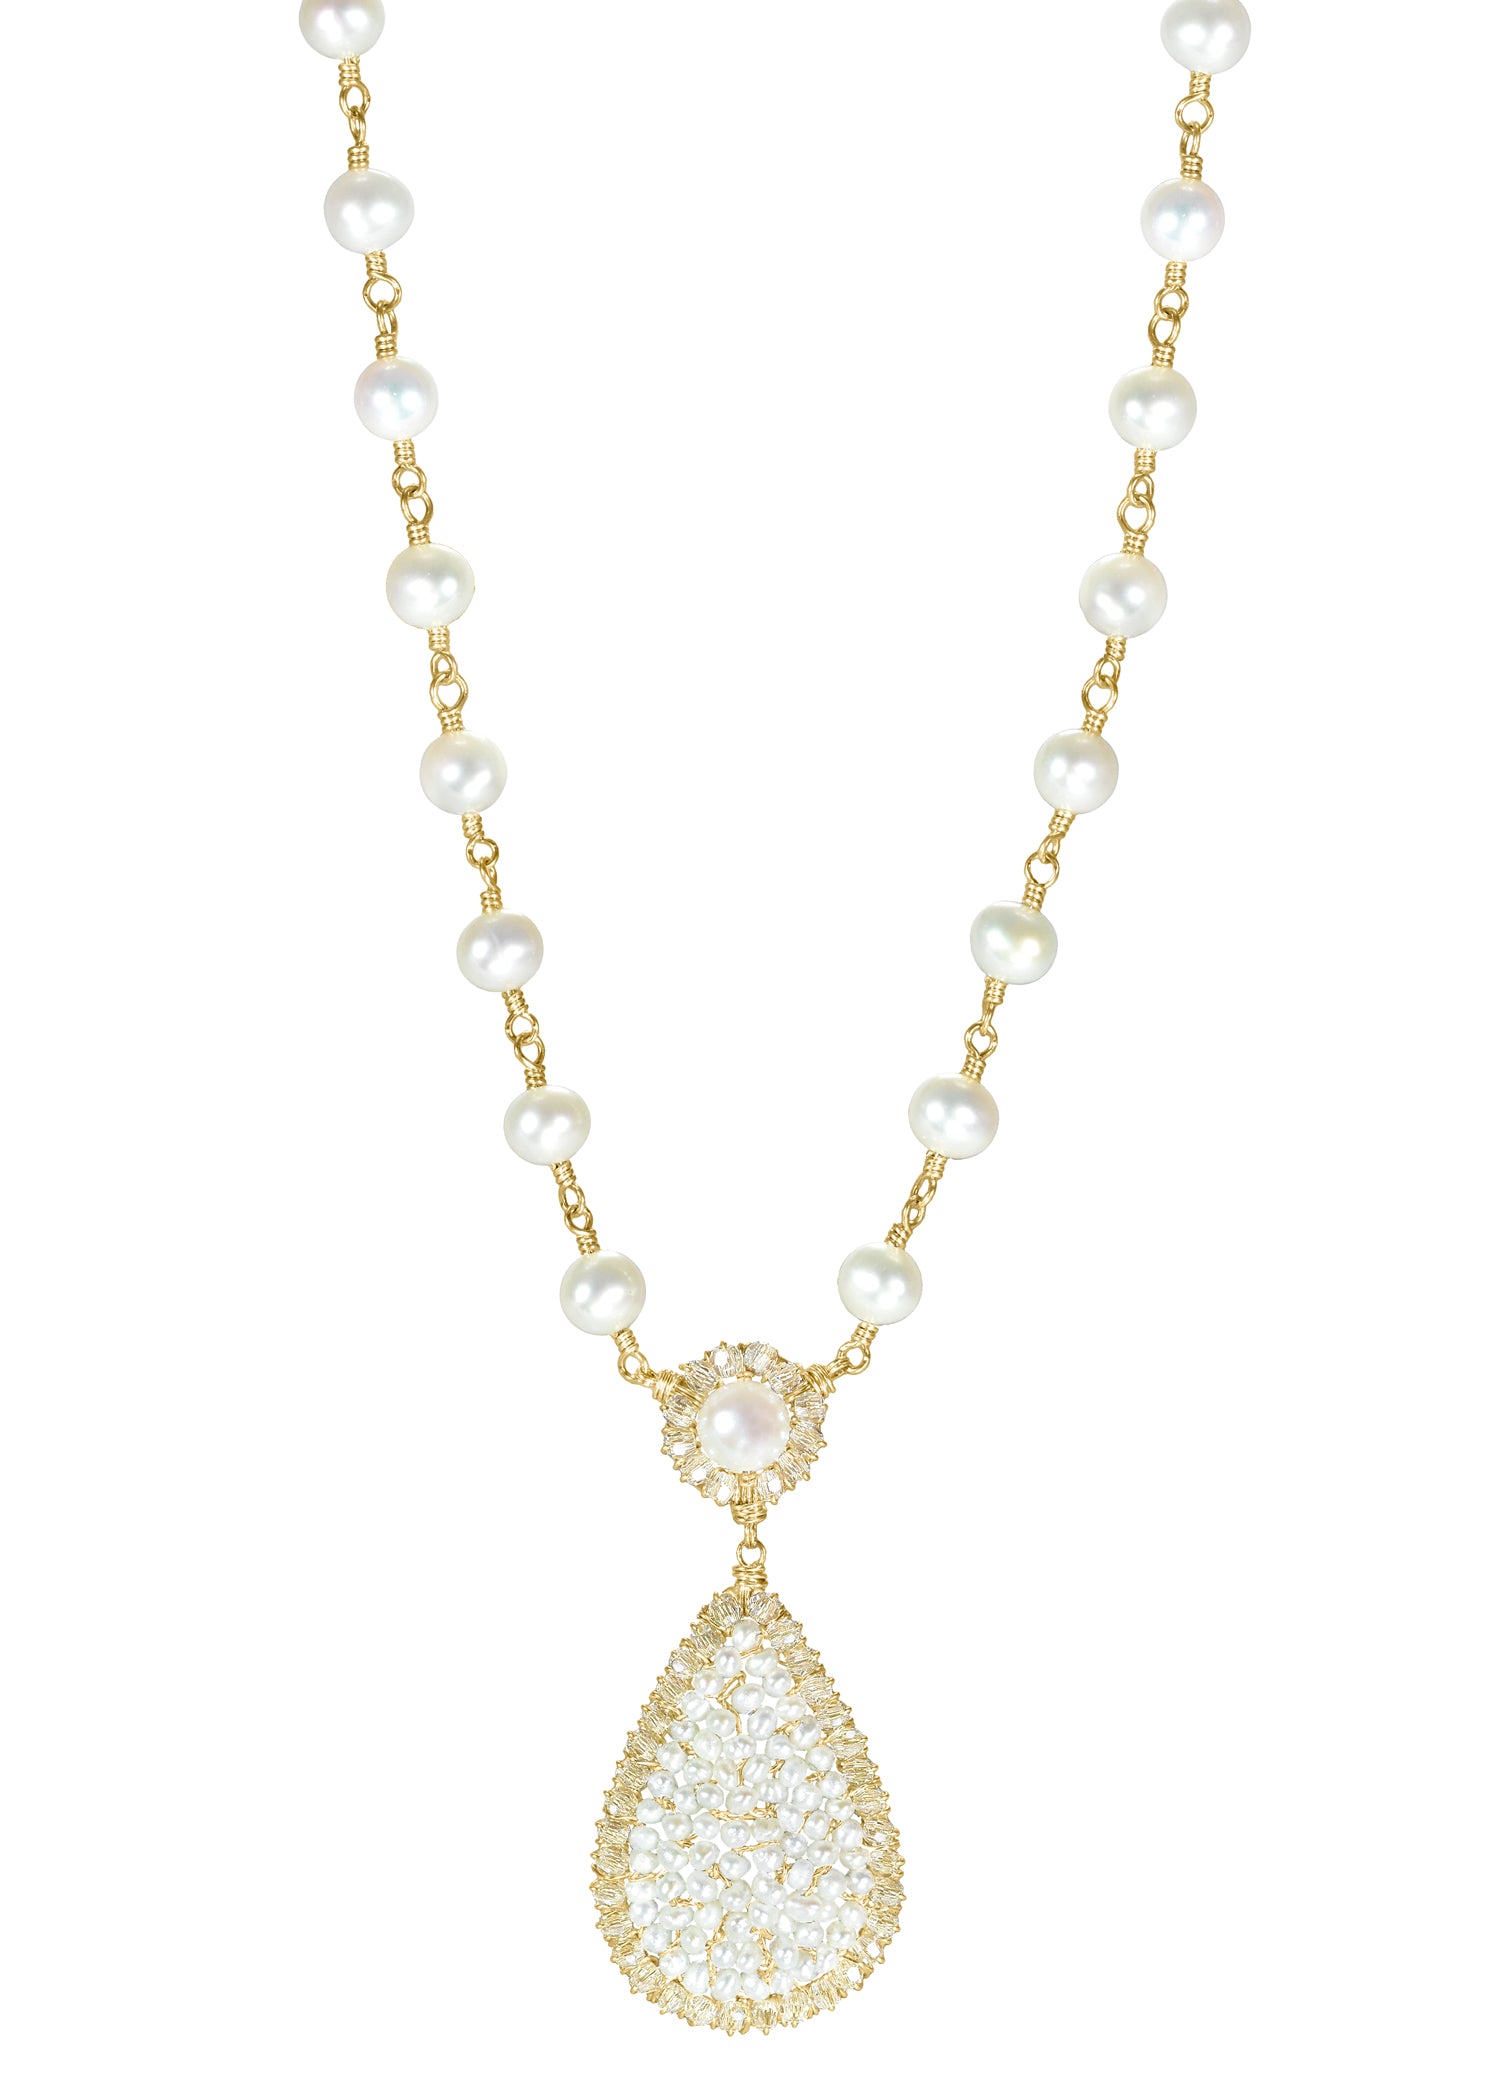 Crystal Freshwater pearl 14k gold fill Necklace measures 18" (including a 2" extender) Pendant measures 1-5/8" in length and 11/16" in width at the widest point Handmade in our Los Angeles studio